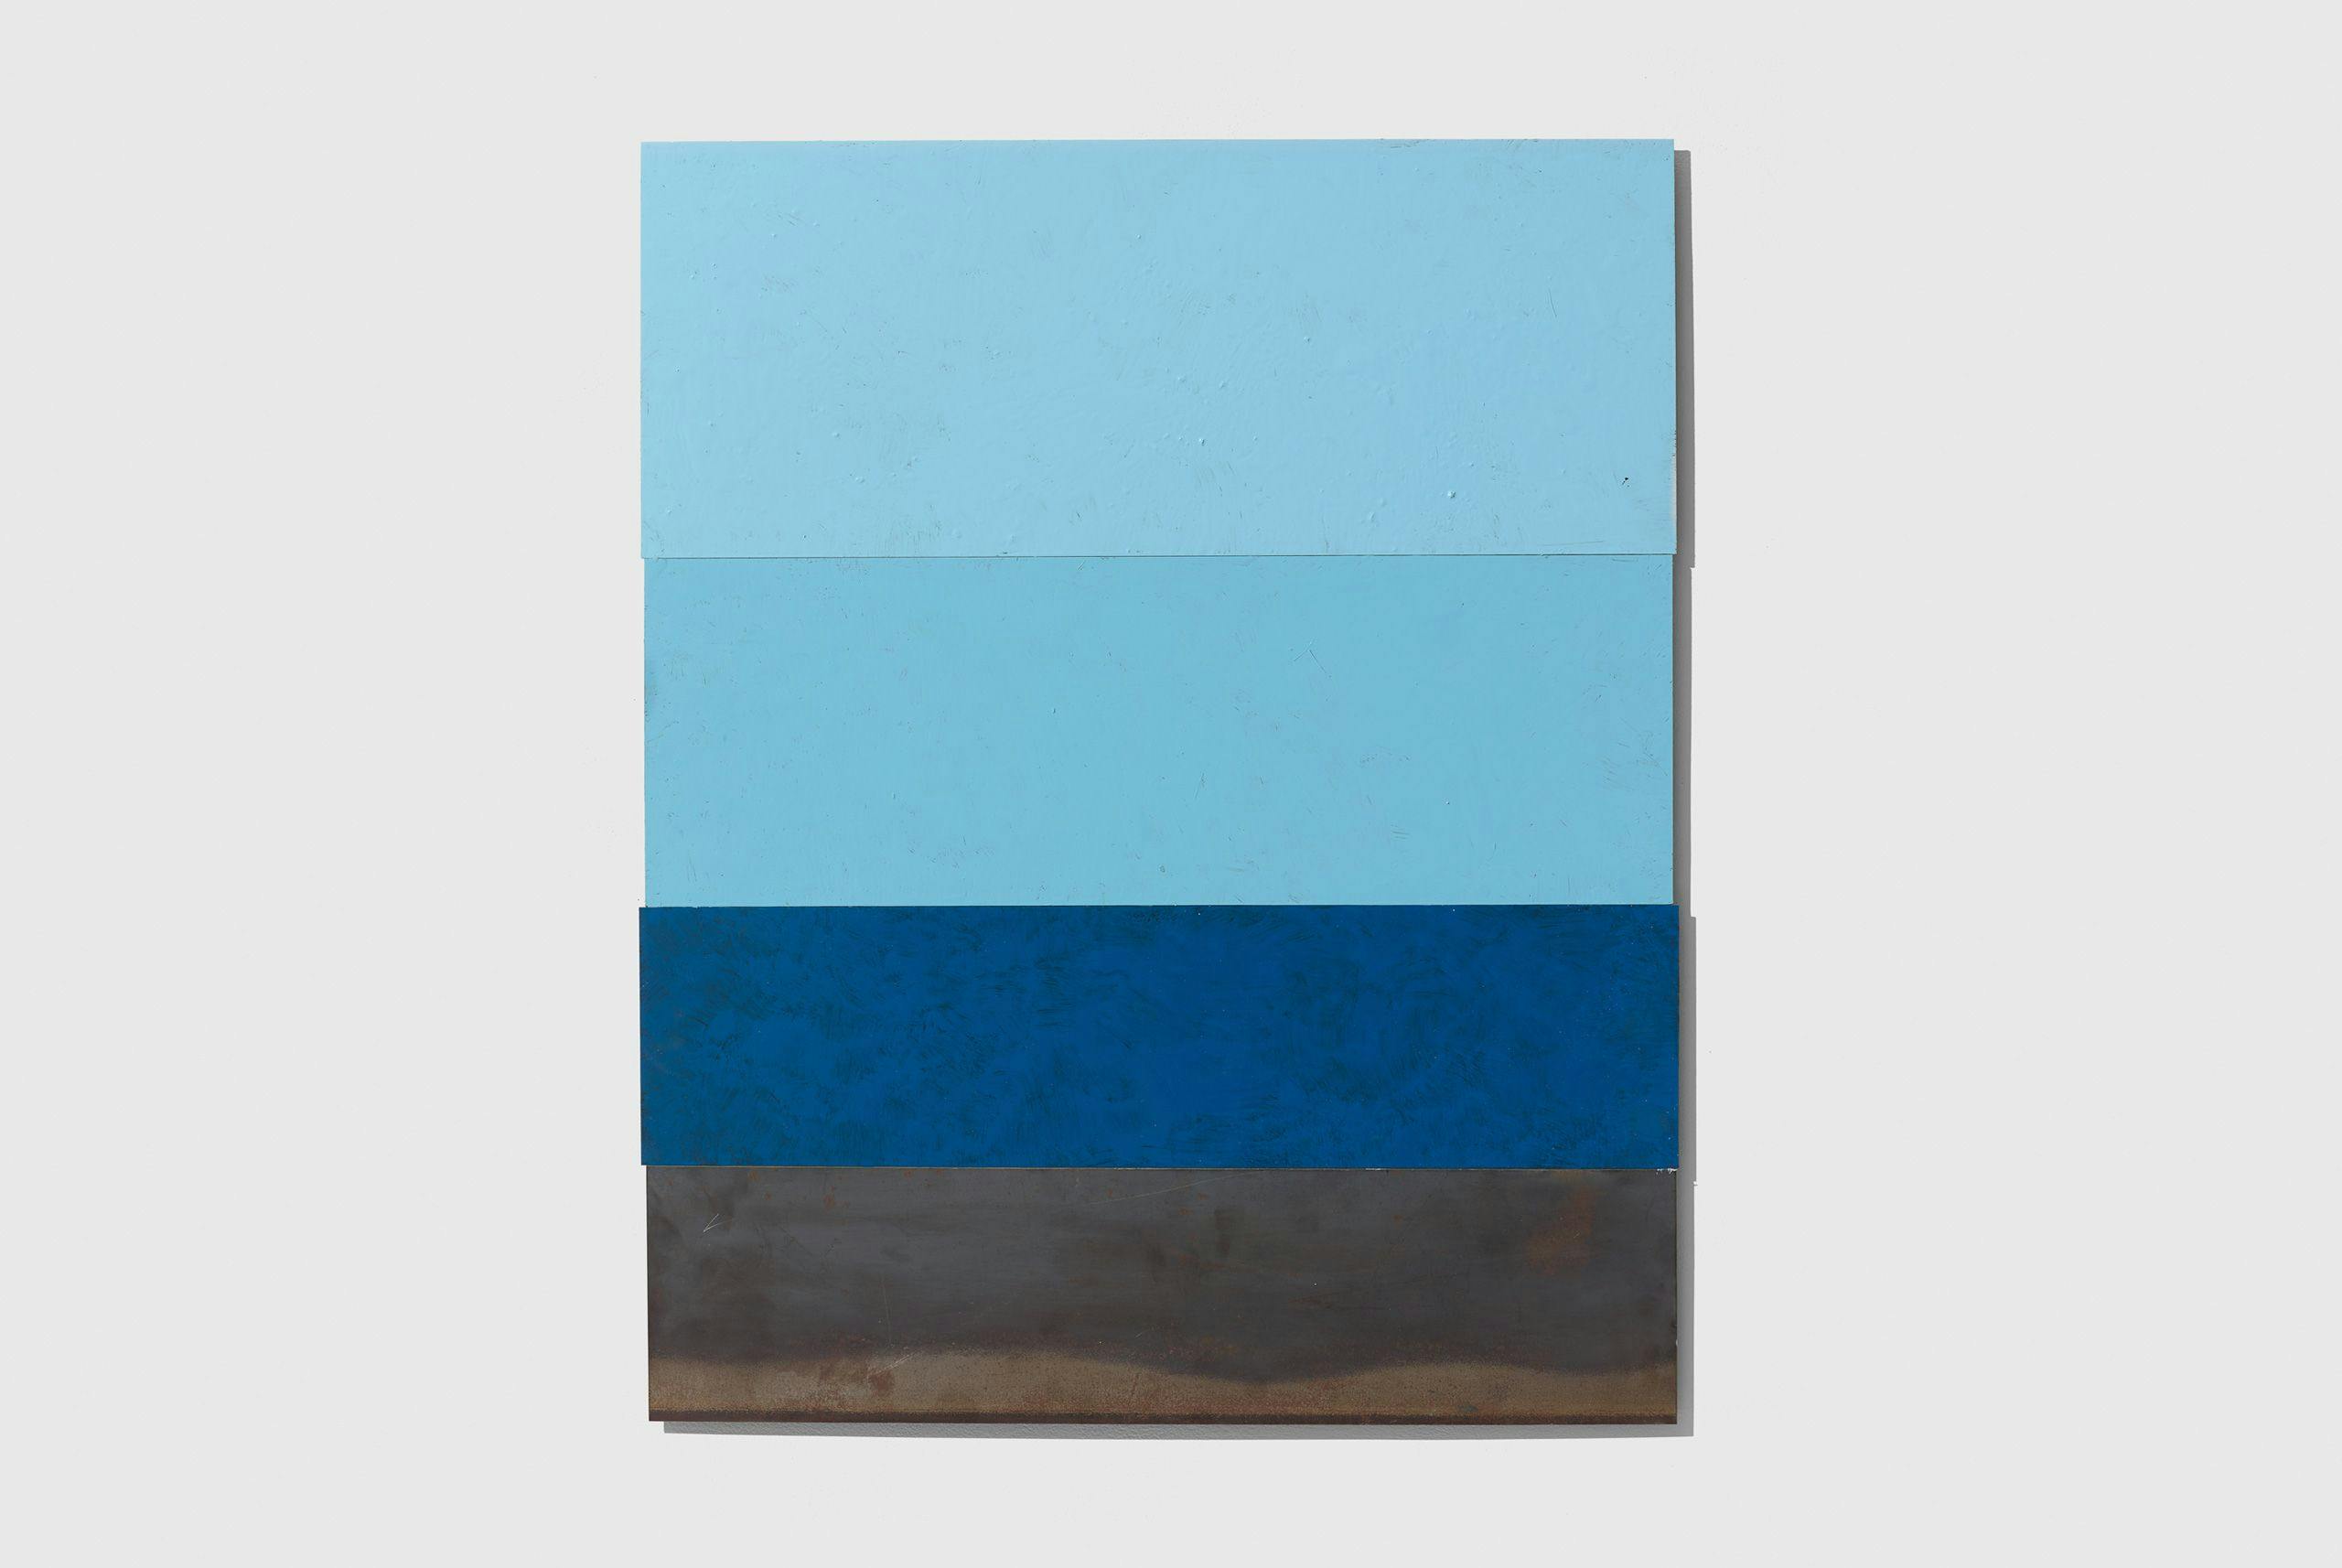 A steel painting by Merrill Wagner titled One Square Equals Three Blues dated 2013